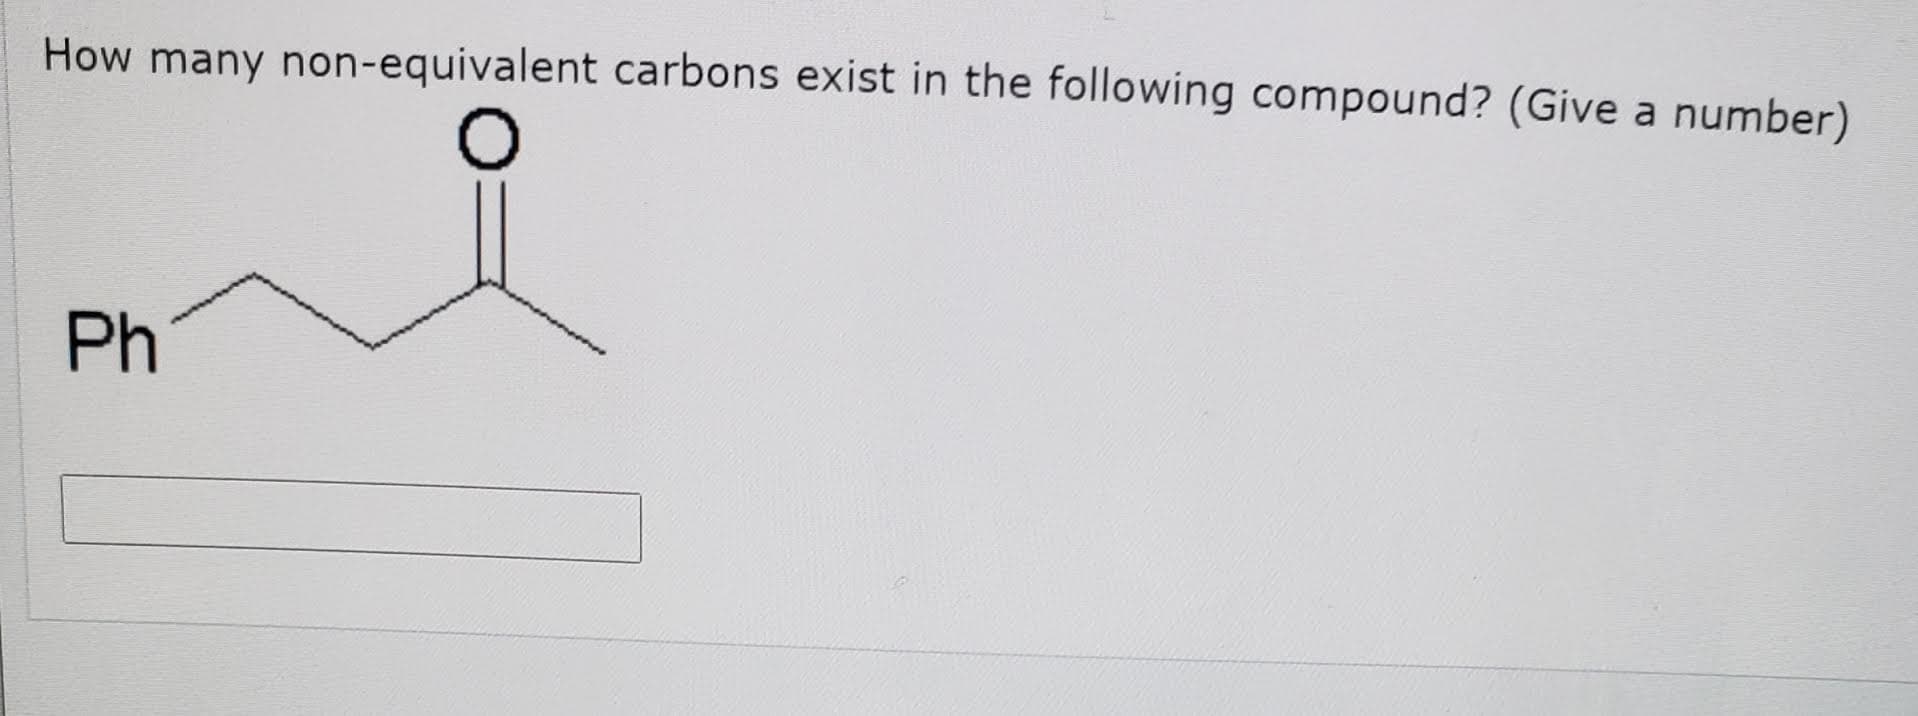 How many non-equivalent carbons exist in the following compound? (Give a number)
Ph
